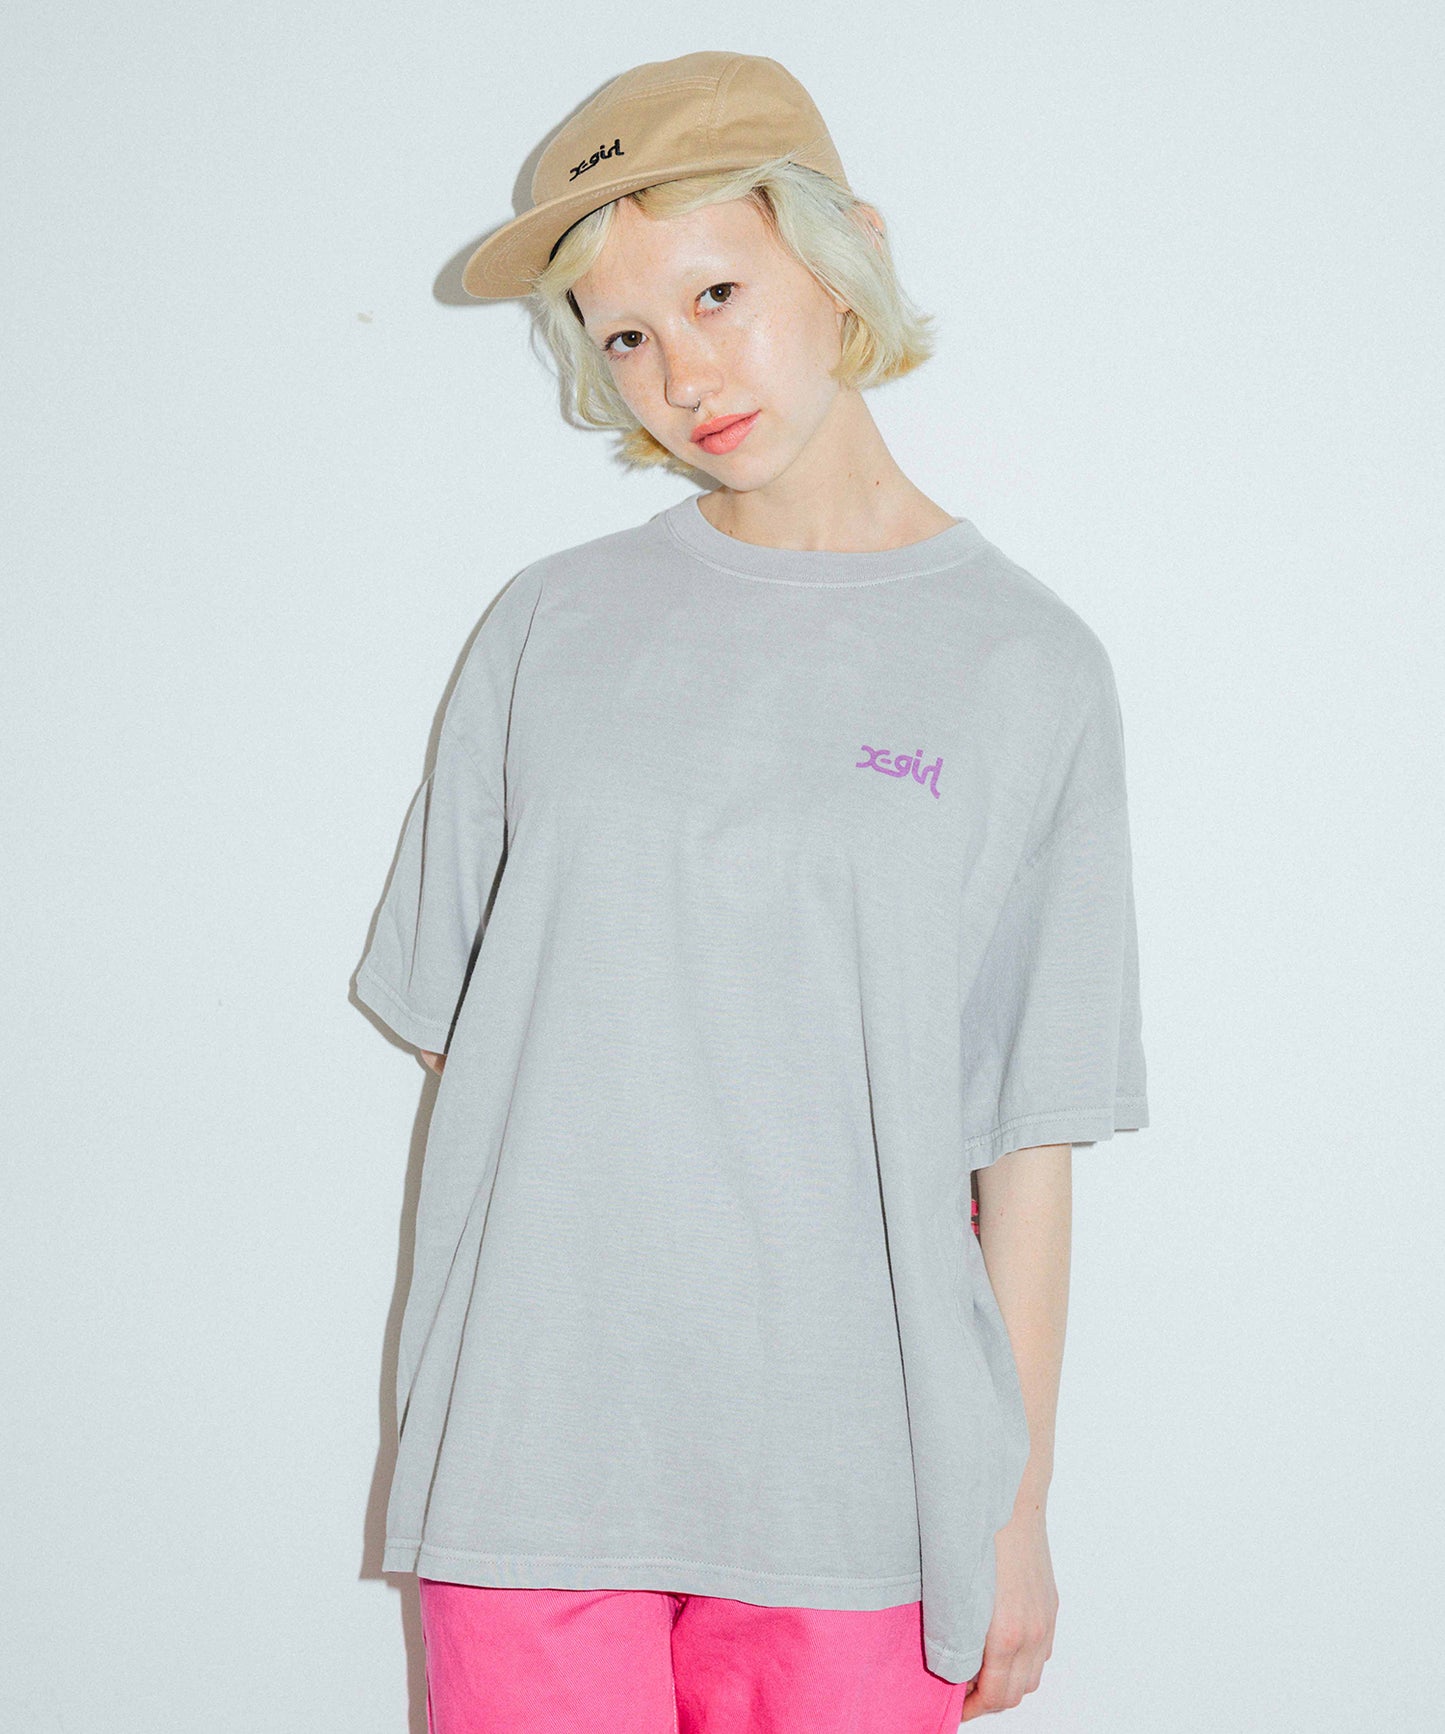 WORDS LOGO PIGMENT DYED S/S MENS TEE, T-SHIRT, X-Girl  